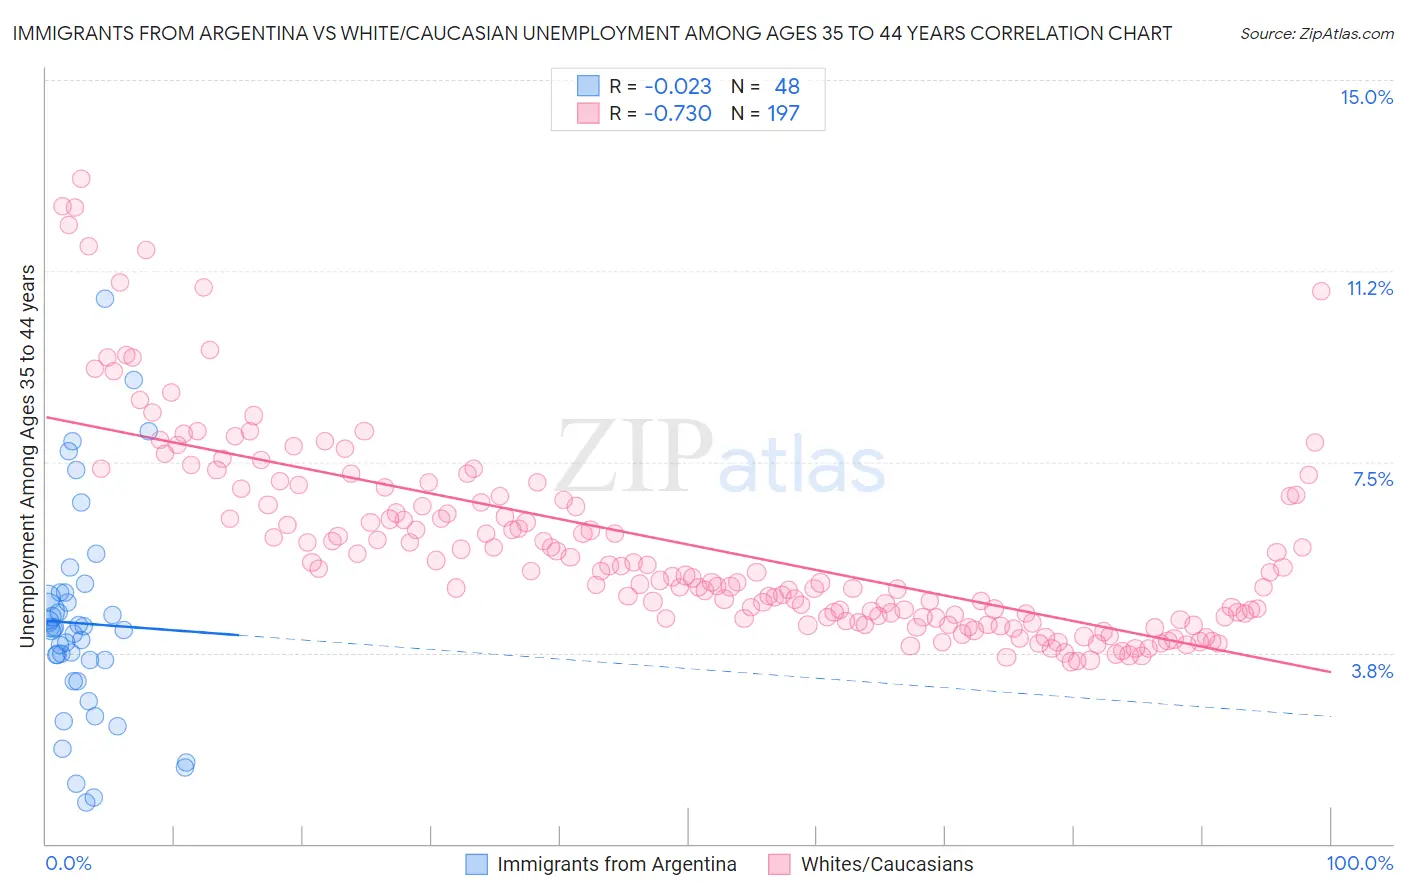 Immigrants from Argentina vs White/Caucasian Unemployment Among Ages 35 to 44 years